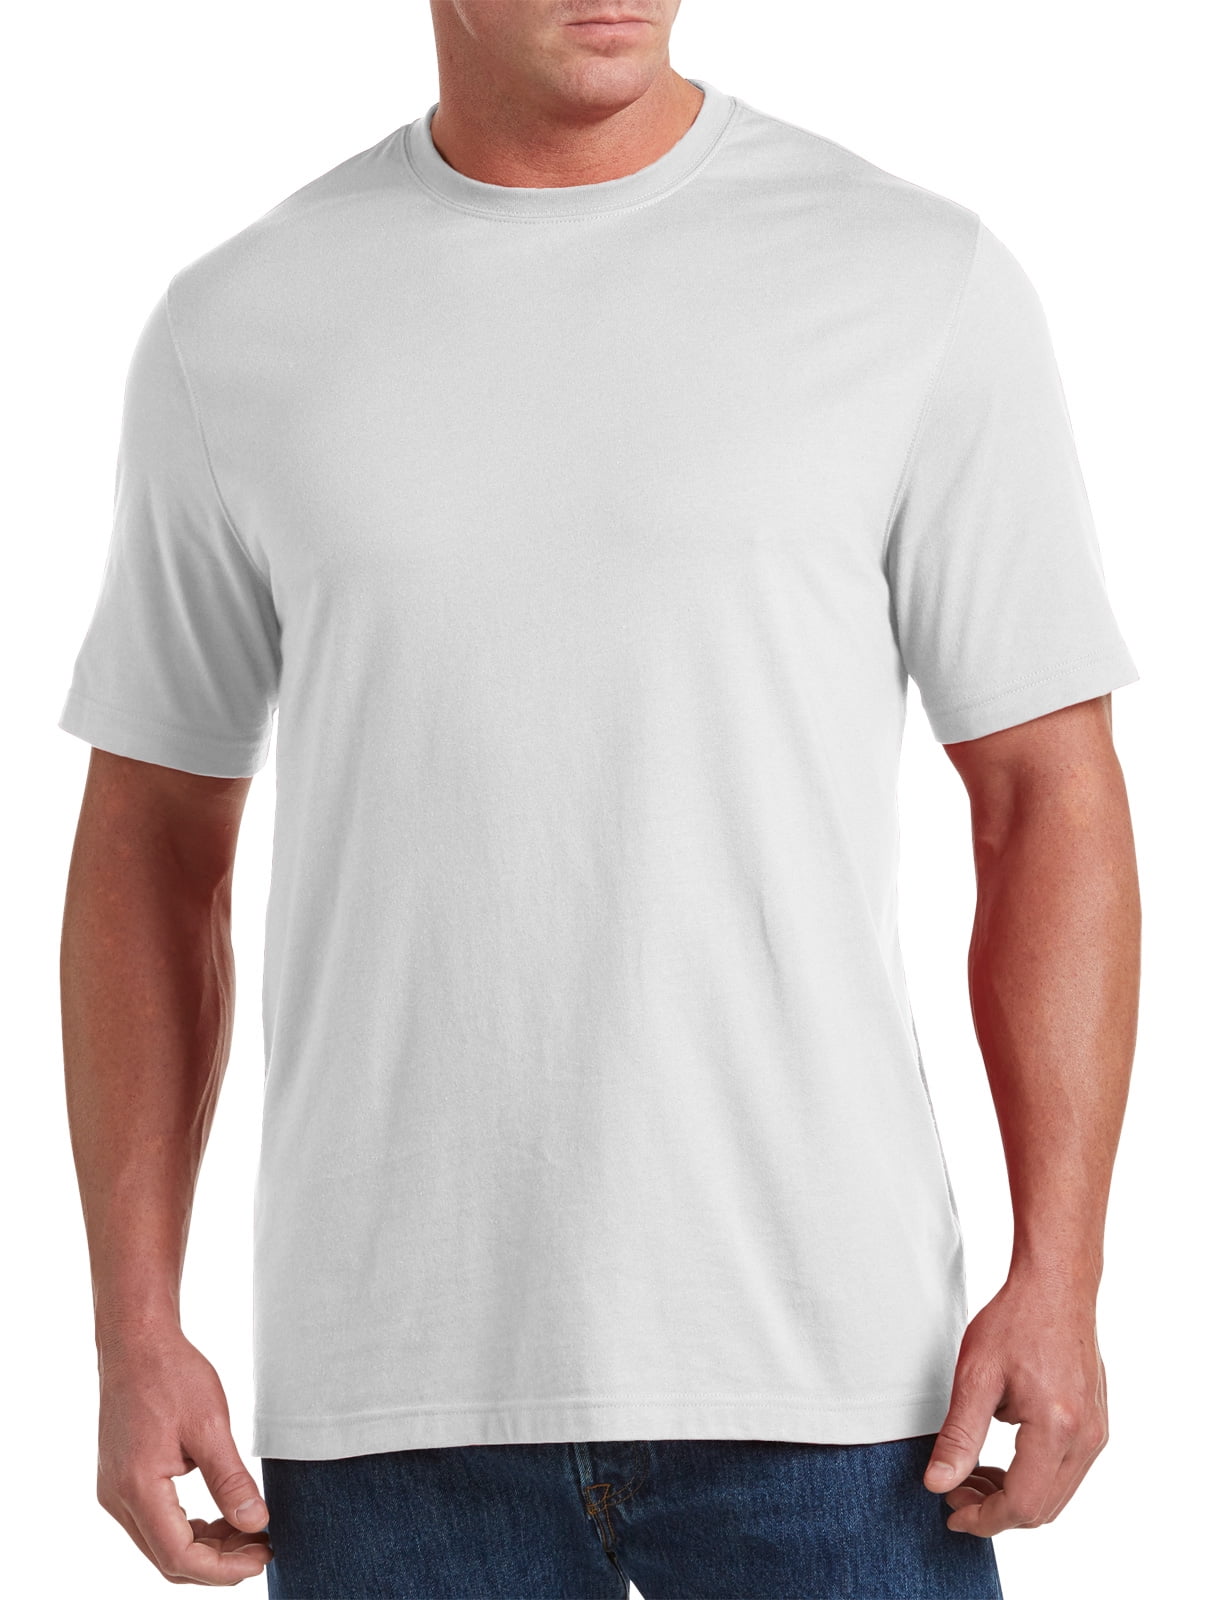 Harbor Bay by DXL Big and Tall Men's Wicking No Pocket Tee Shirt, White ...